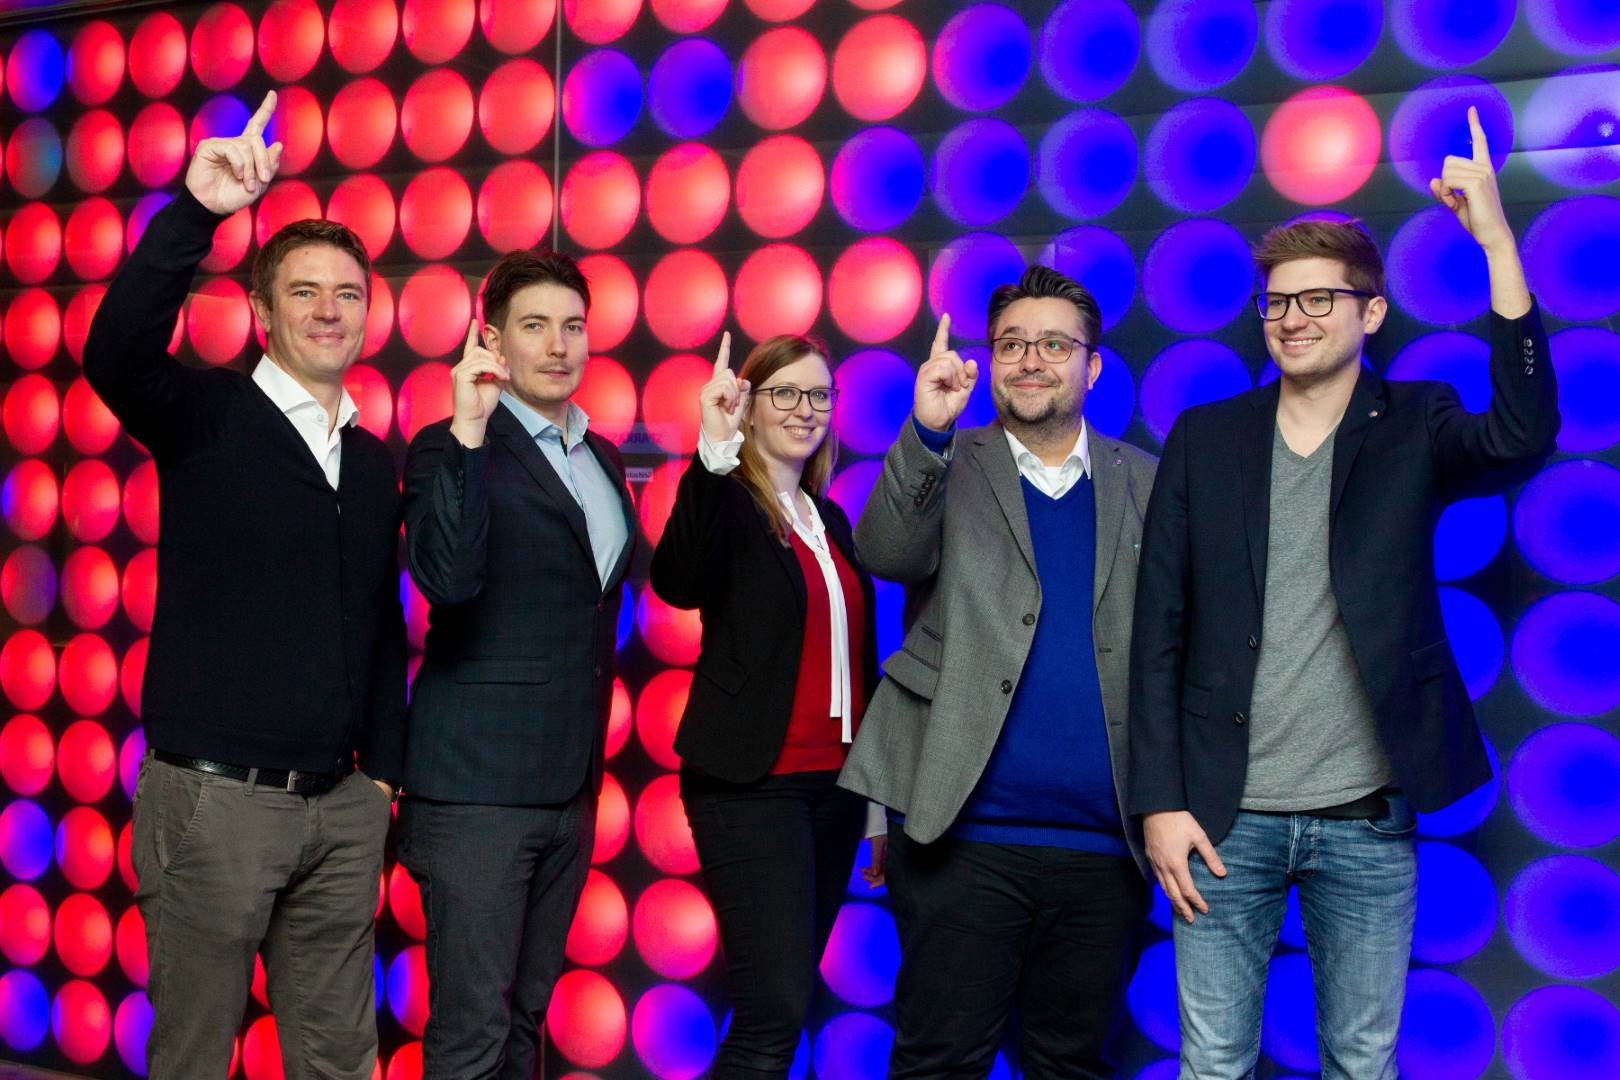 Delighted about the new devolopment: TheHolo-Light Founders, from left: Michael Oberlechner, Alexander Werlberger, Susanne Haspinger, Florian Haspinger, Luis Bollinger. Photo: Michael Kristen